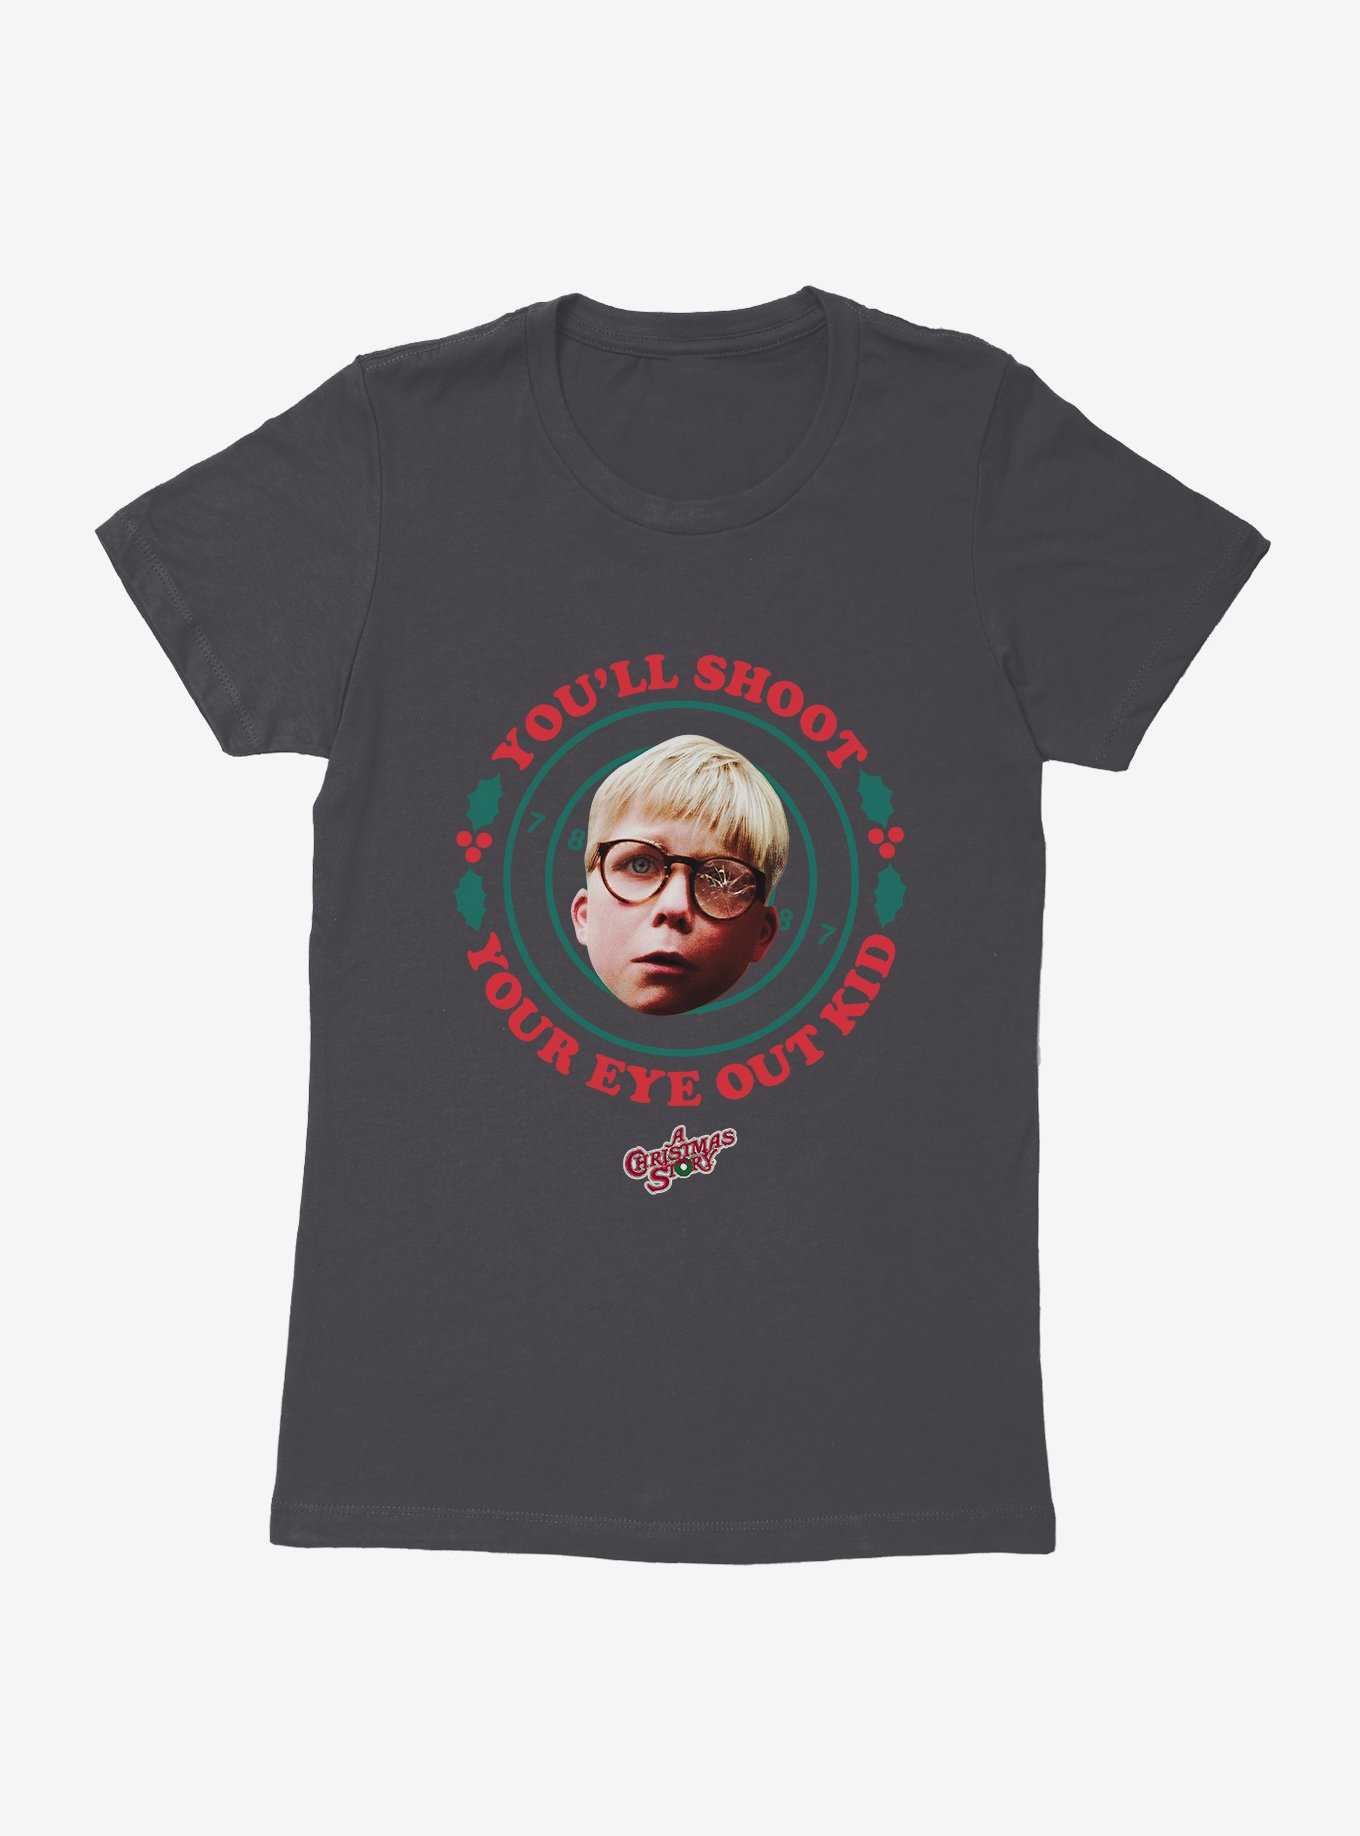 A Christmas Story Shoot Your Eye Out Womens T-Shirt, , hi-res